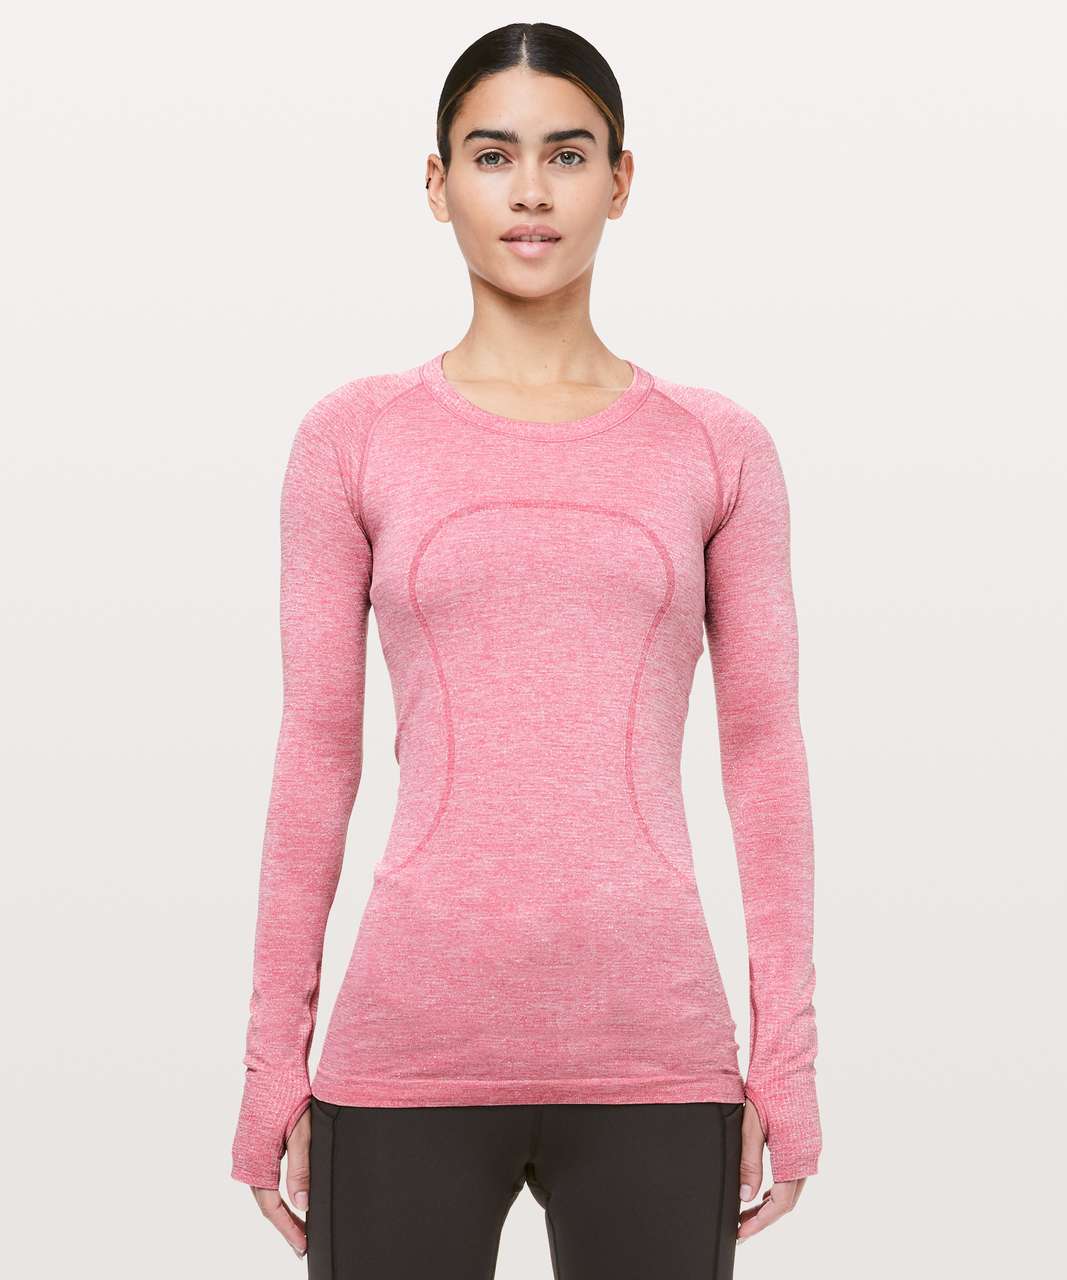 Lululemon Swiftly Tech Long Sleeve Crew *Sparkle - Violet Red / White / Silver